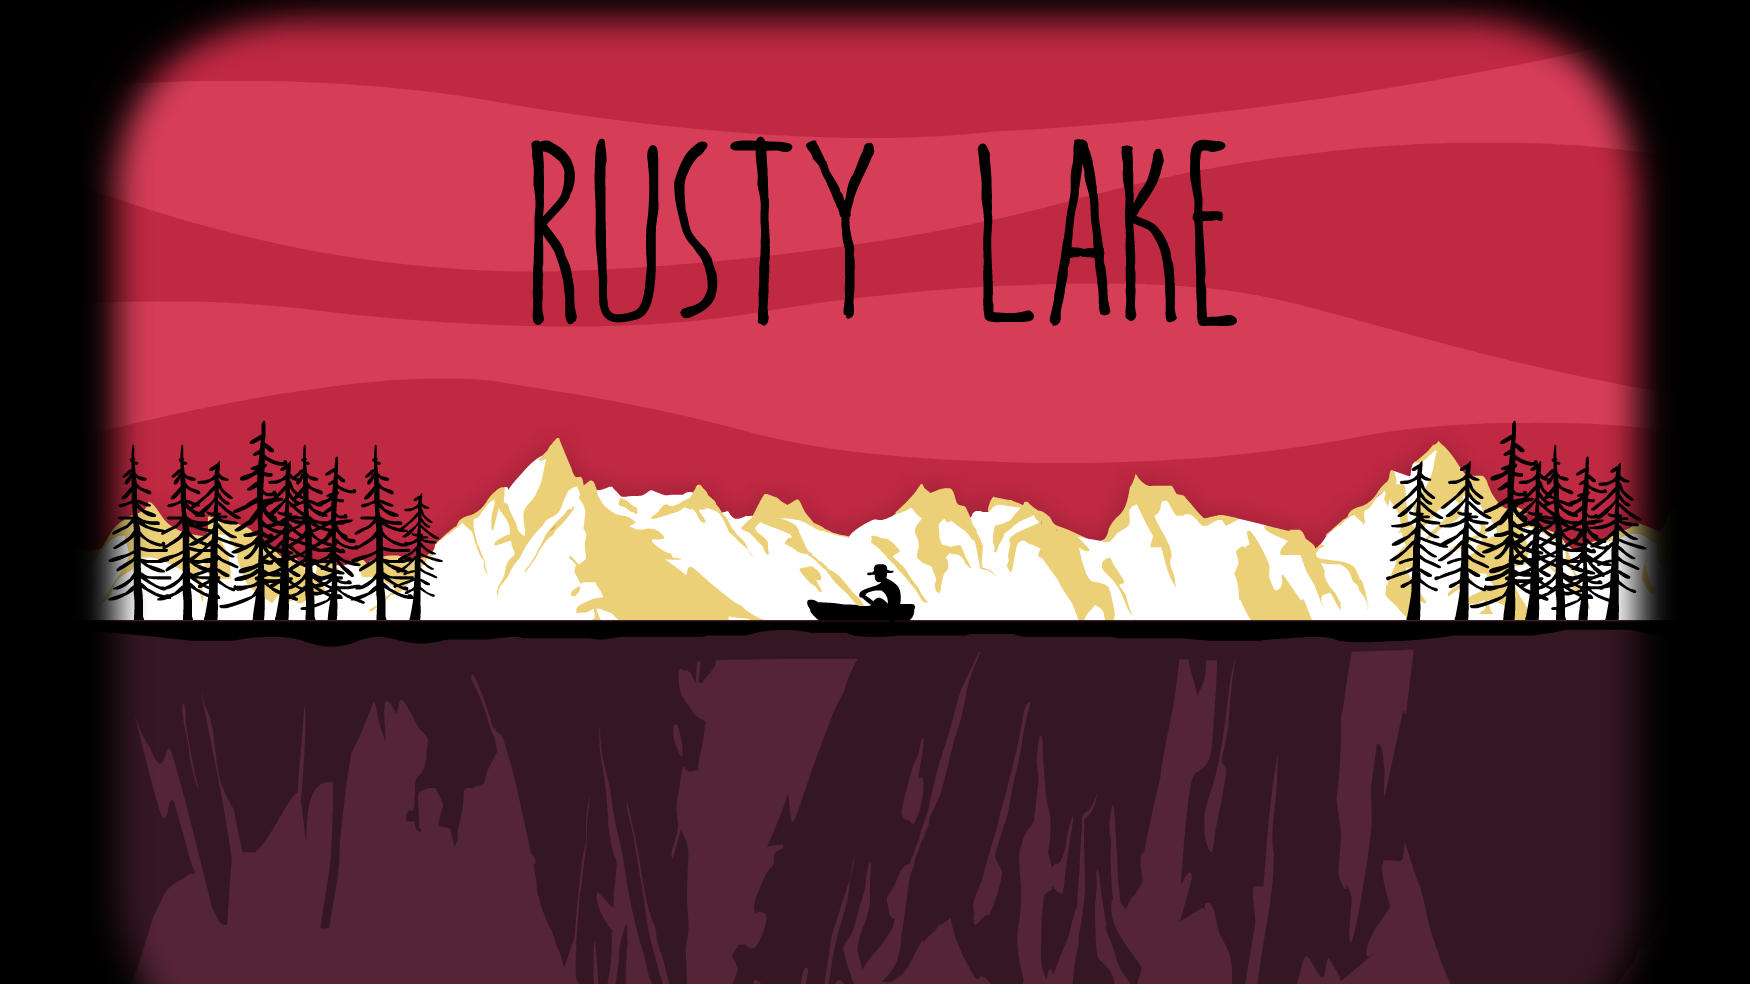 Rusty Lake T-Shirts are Coming